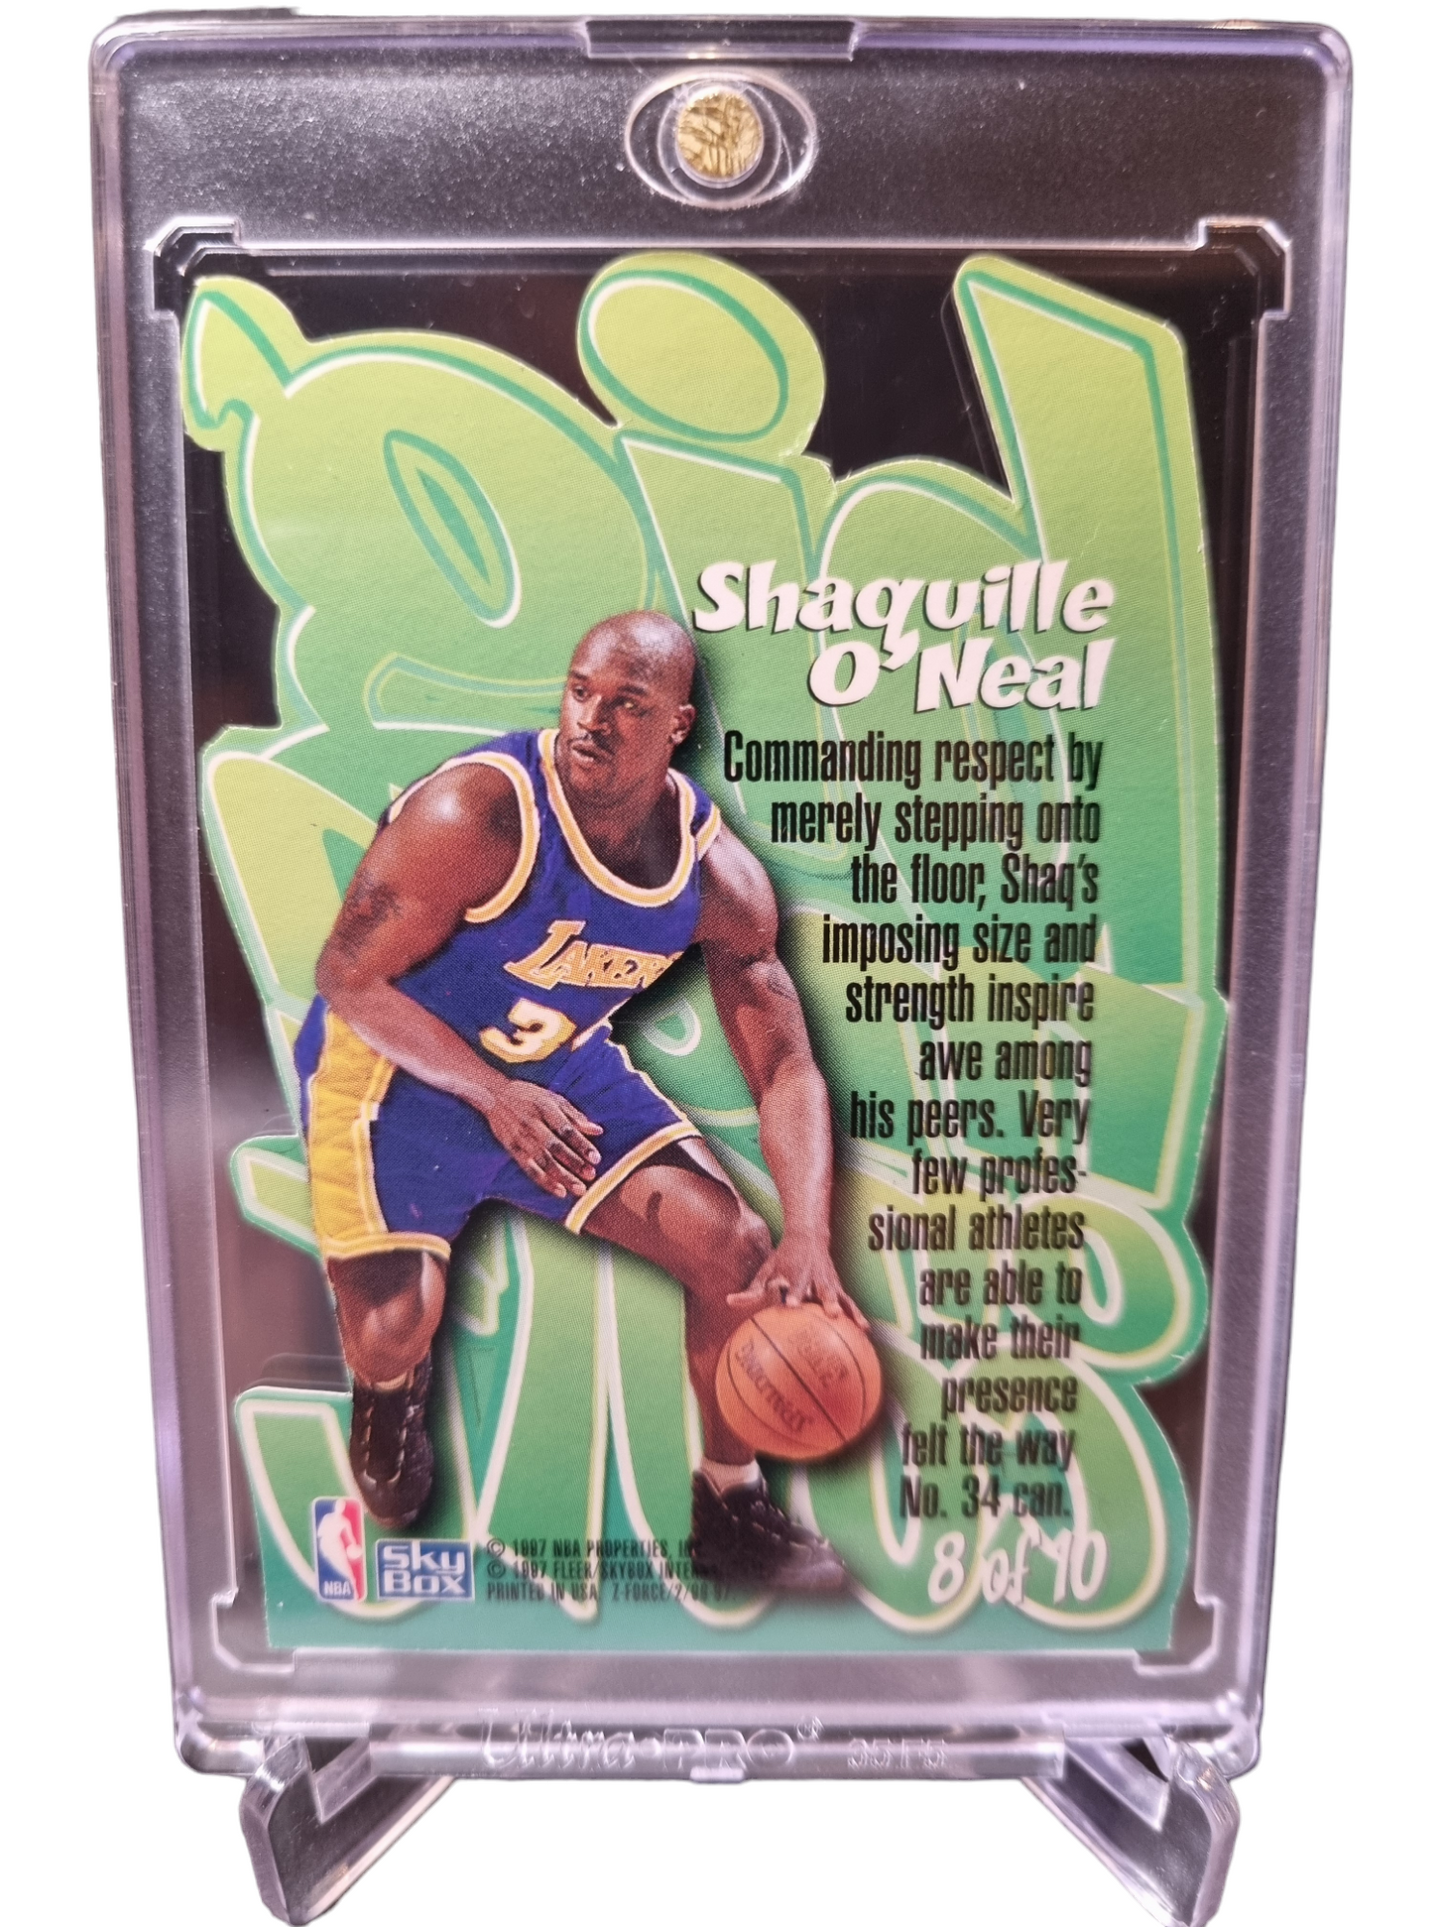 1997 Skybox #8 of 10 Shaquille O'Neal Big Man On Court Die Cut SSP